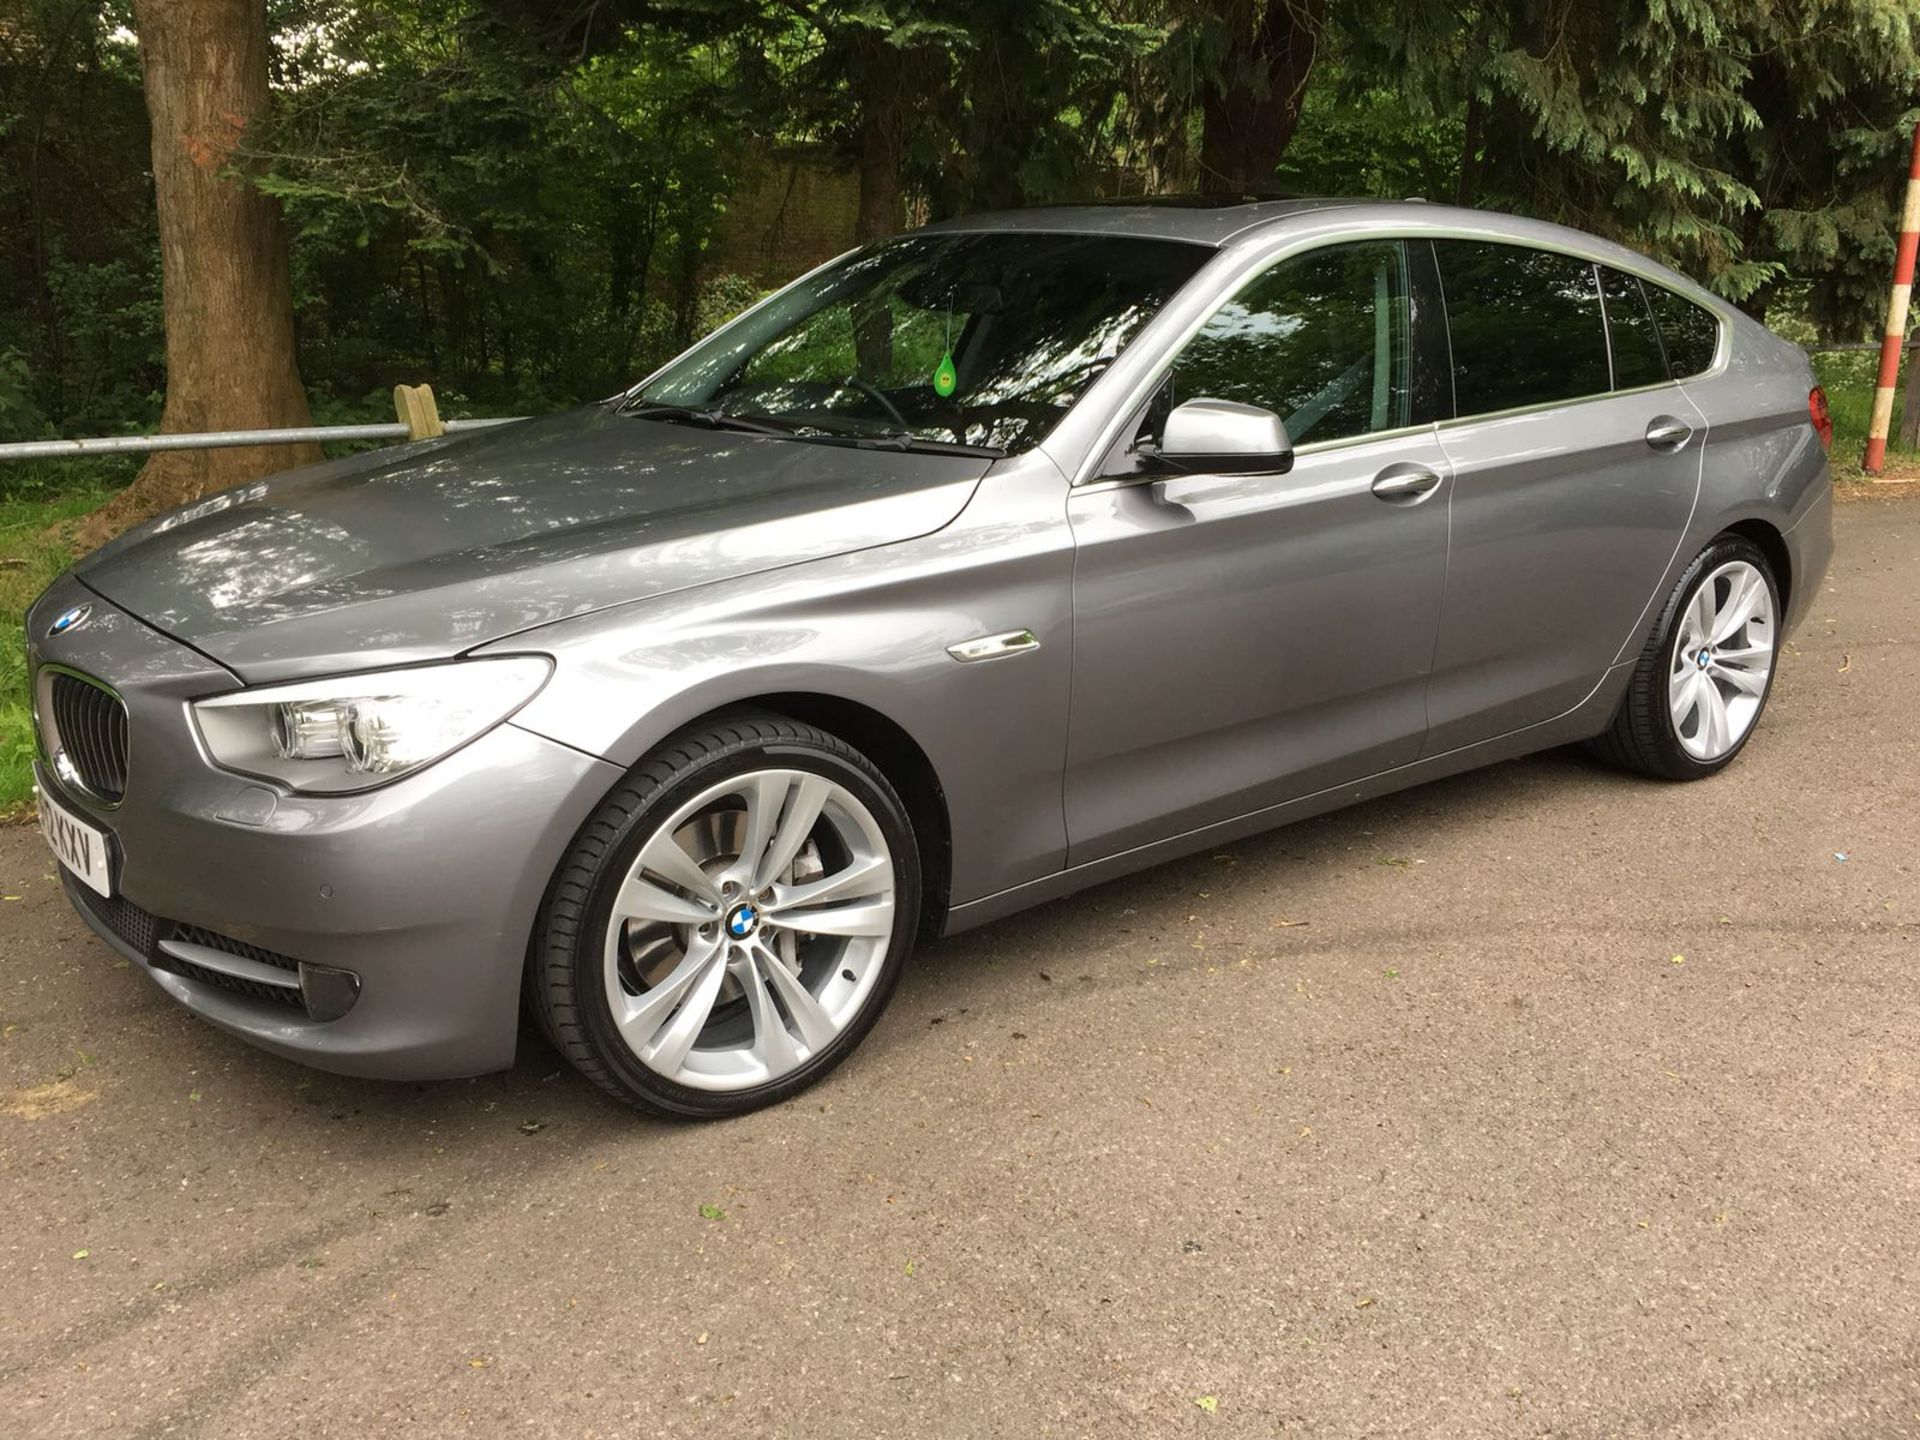 BMW 535d GT GRAN TURISMO 2012/12. 57,000 miles Mega spec and fully loaded. 4 New Tyres Just Fitted!